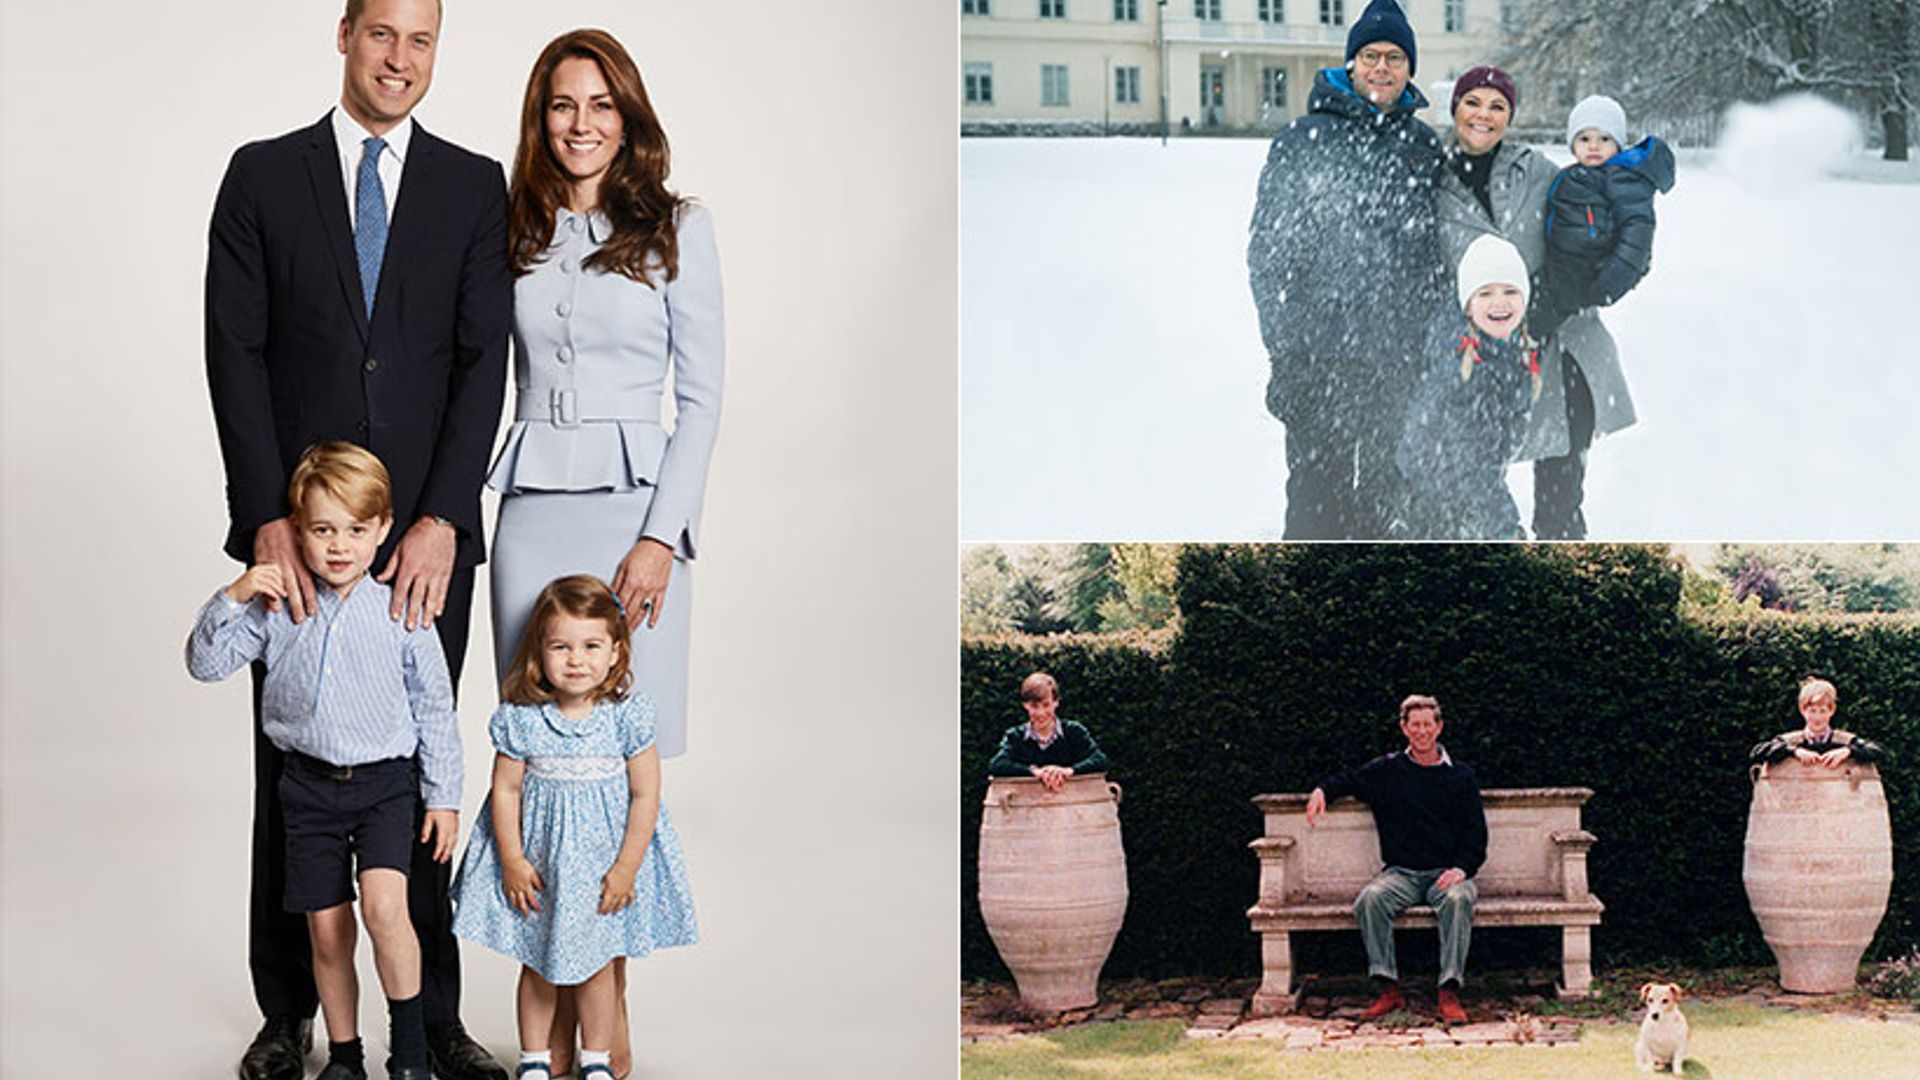 Kate Middleton's Christmas card compared to other royals HELLO!